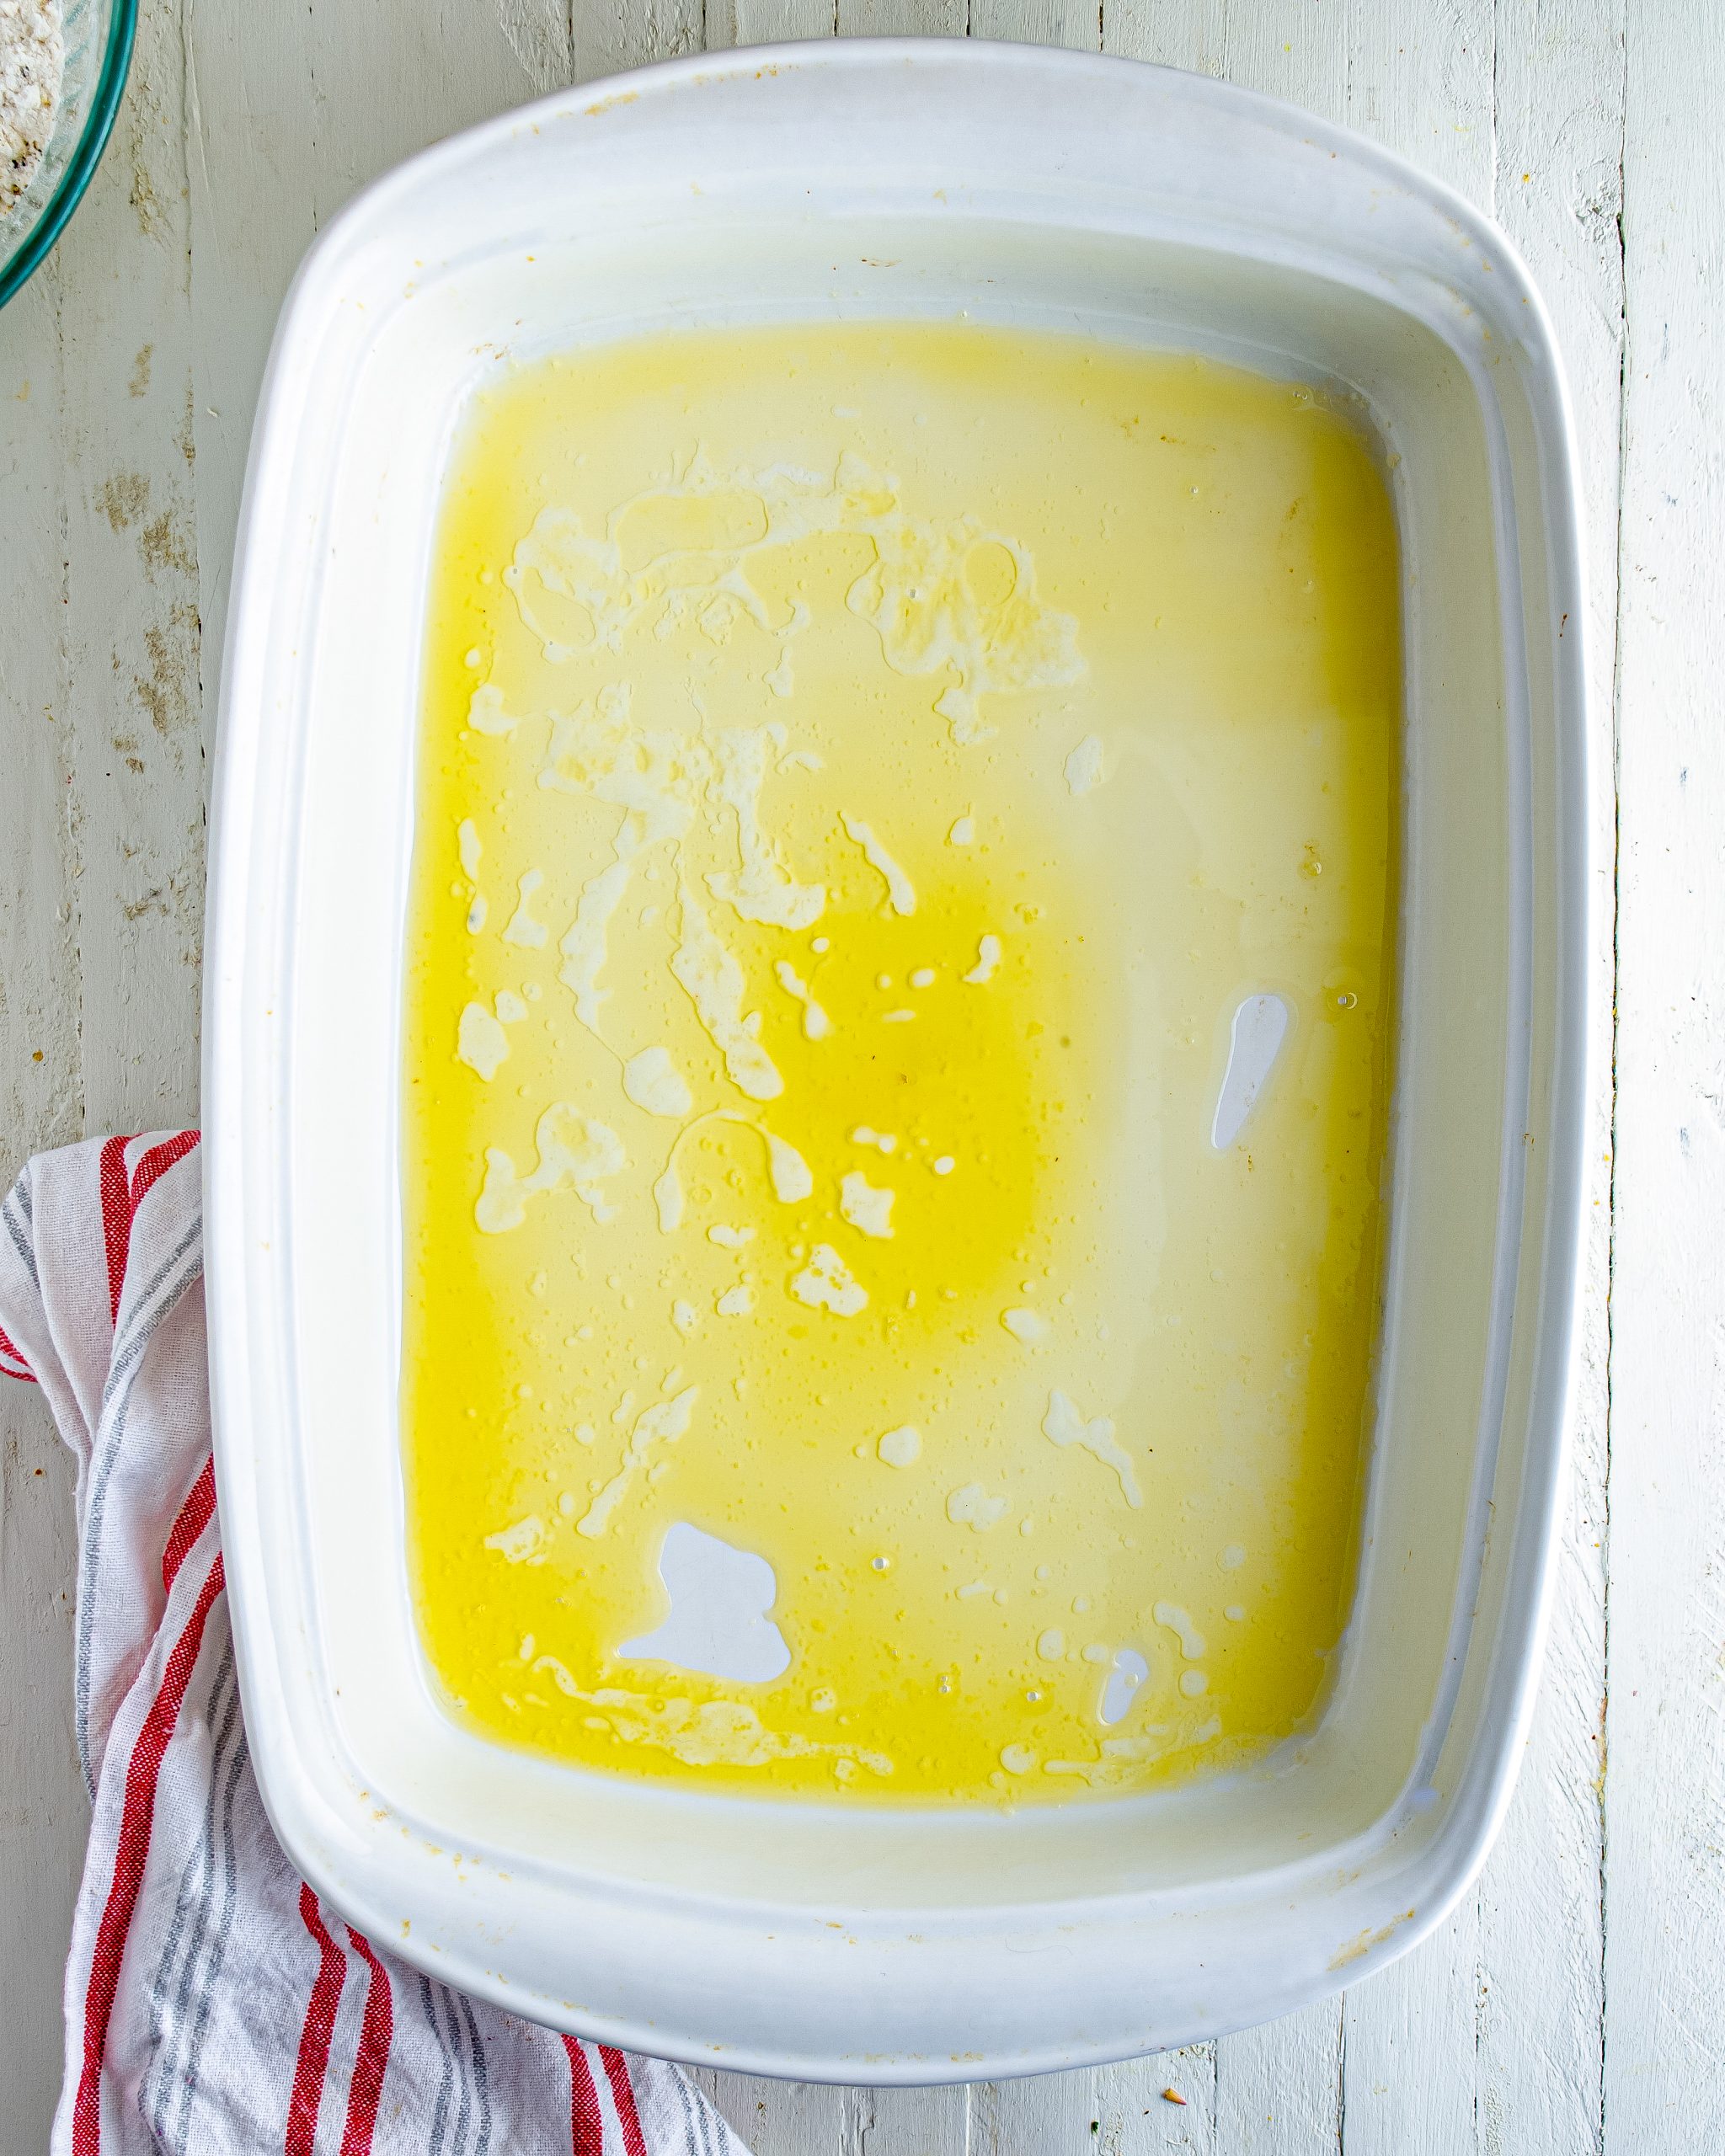 Melt the butter, and place it into the bottom of a 9x13 baking dish.